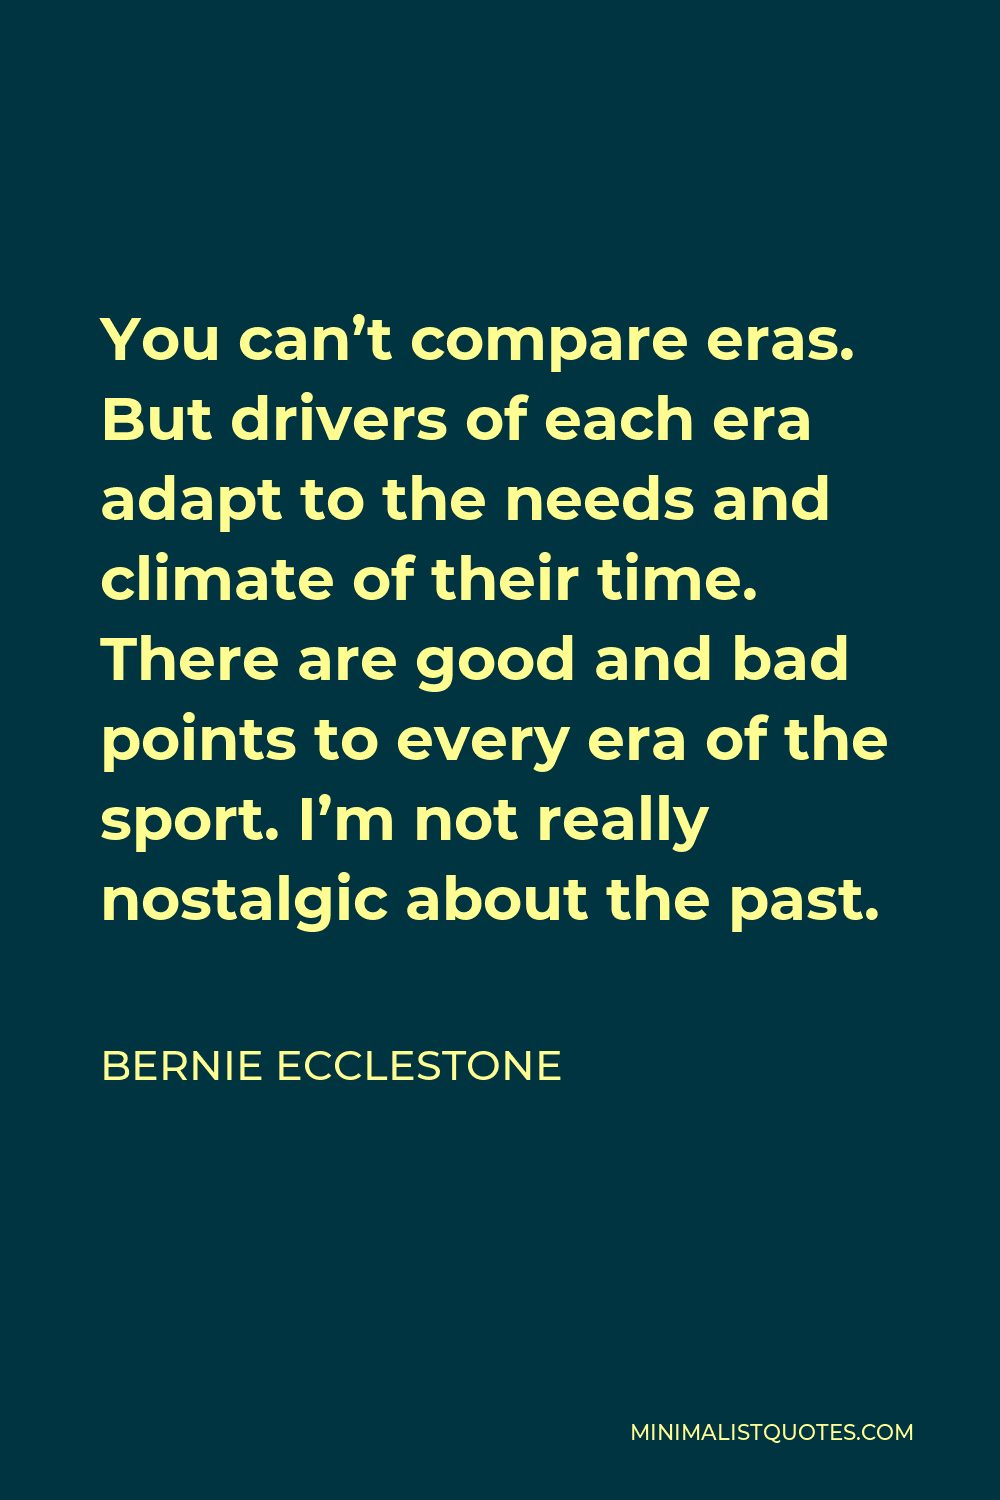 Bernie Ecclestone Quote - You can’t compare eras. But drivers of each era adapt to the needs and climate of their time. There are good and bad points to every era of the sport. I’m not really nostalgic about the past.